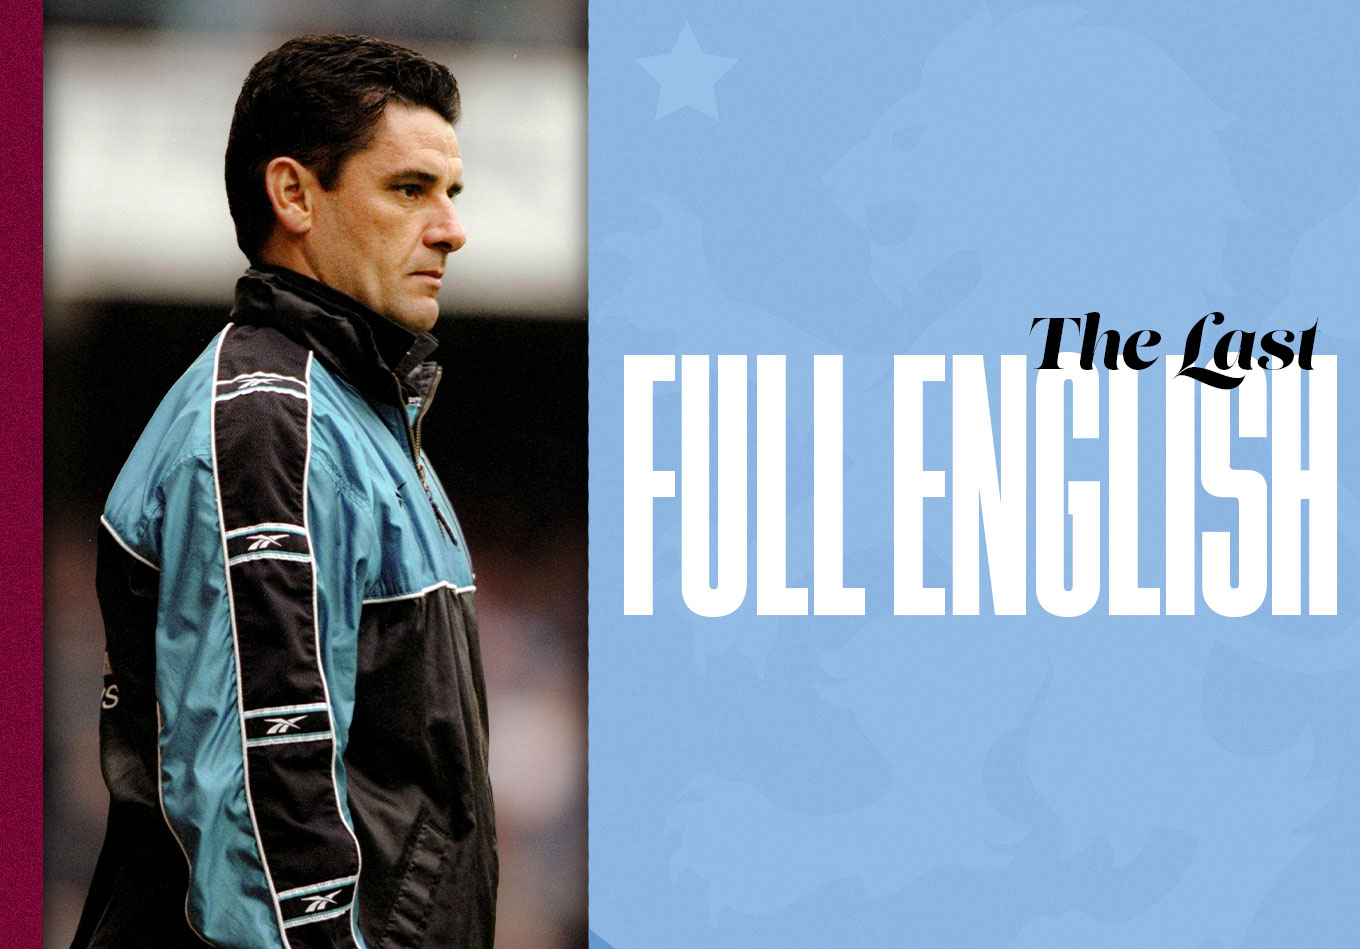 The Full English: A Look Back to 23 Years Ago in the Premier League